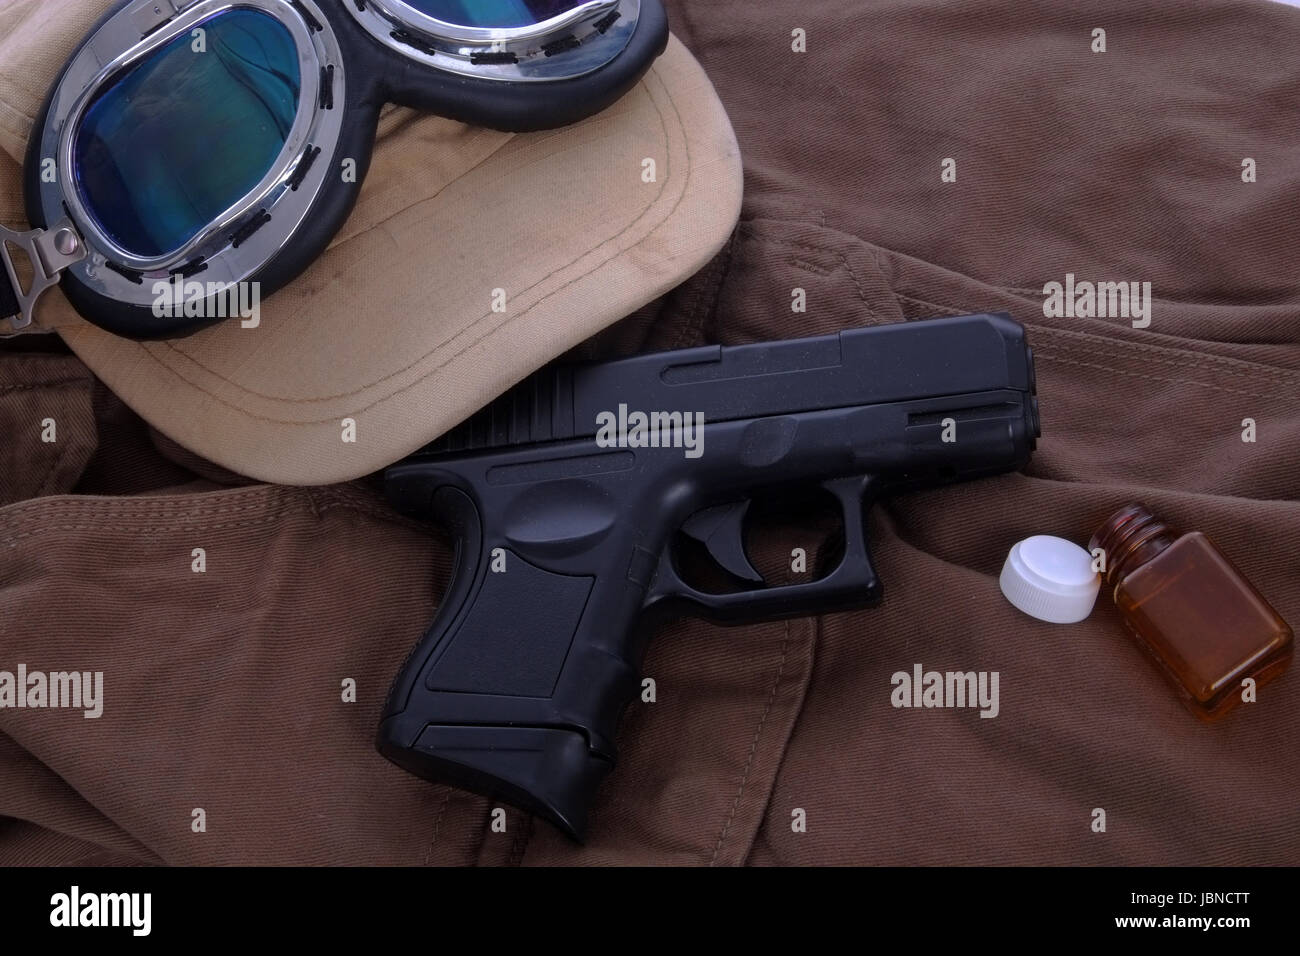 Science fiction or wartime / battle concept table top still life, of gun, hat, goggles and empty pill bottle Stock Photo